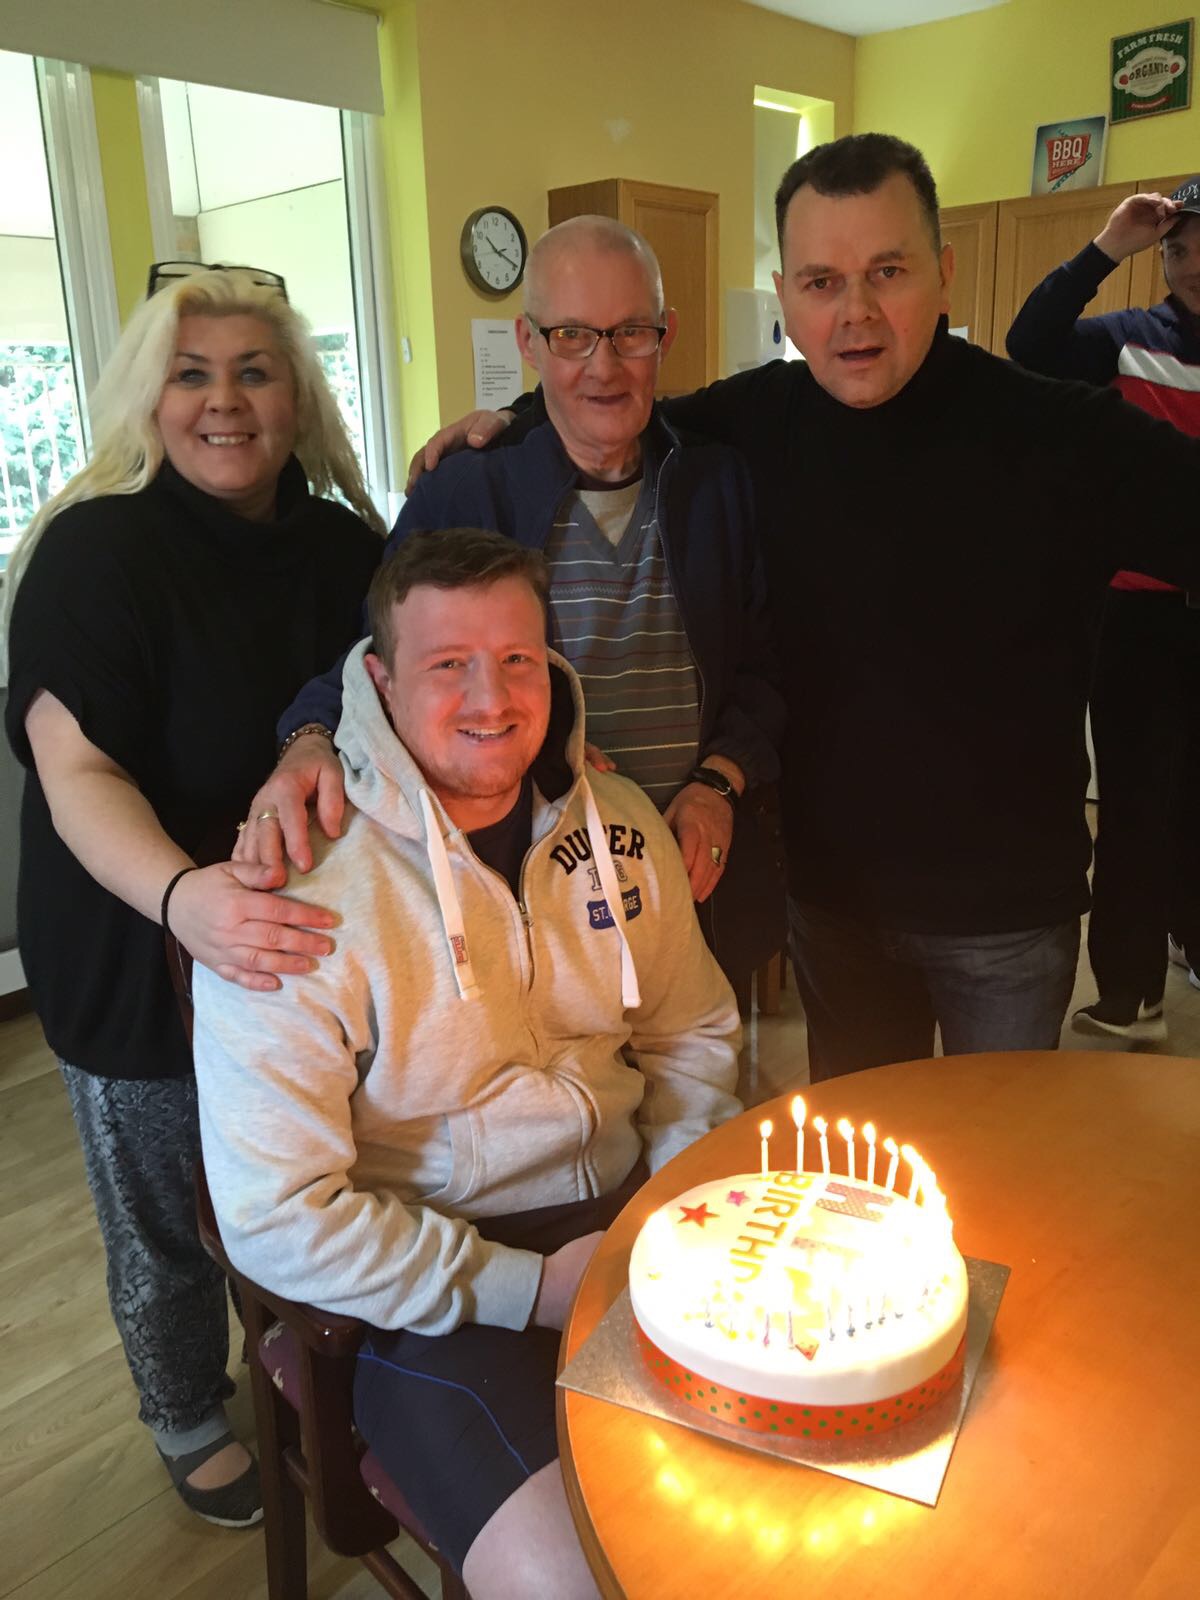 Birthday Celebrations at Regent House: Key Healthcare is dedicated to caring for elderly residents in safe. We have multiple dementia care homes including our care home middlesbrough, our care home St. Helen and care home saltburn. We excel in monitoring and improving care levels.